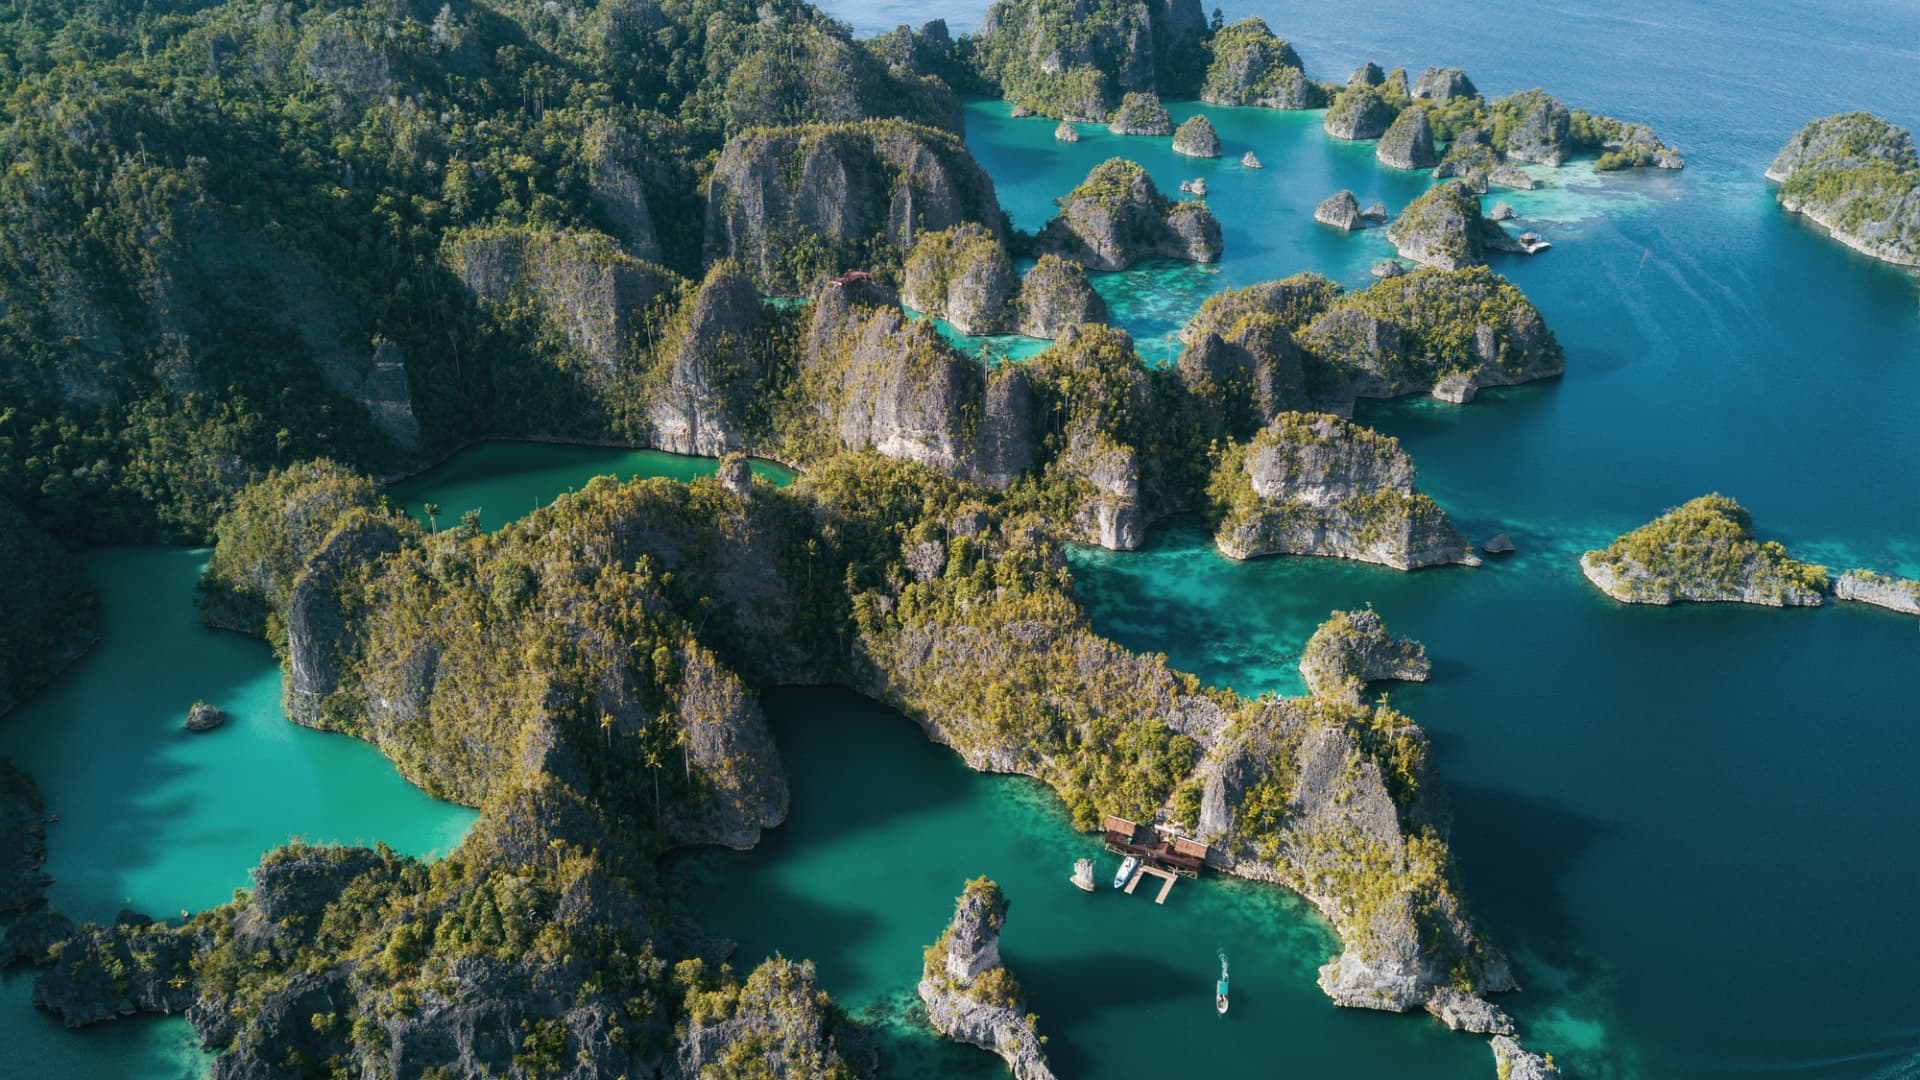 Perhaps the least well-known spot on Asia's list, the island archipelago of Raja Ampat in Indonesia is considered to be among the best places in the world to scuba dive.